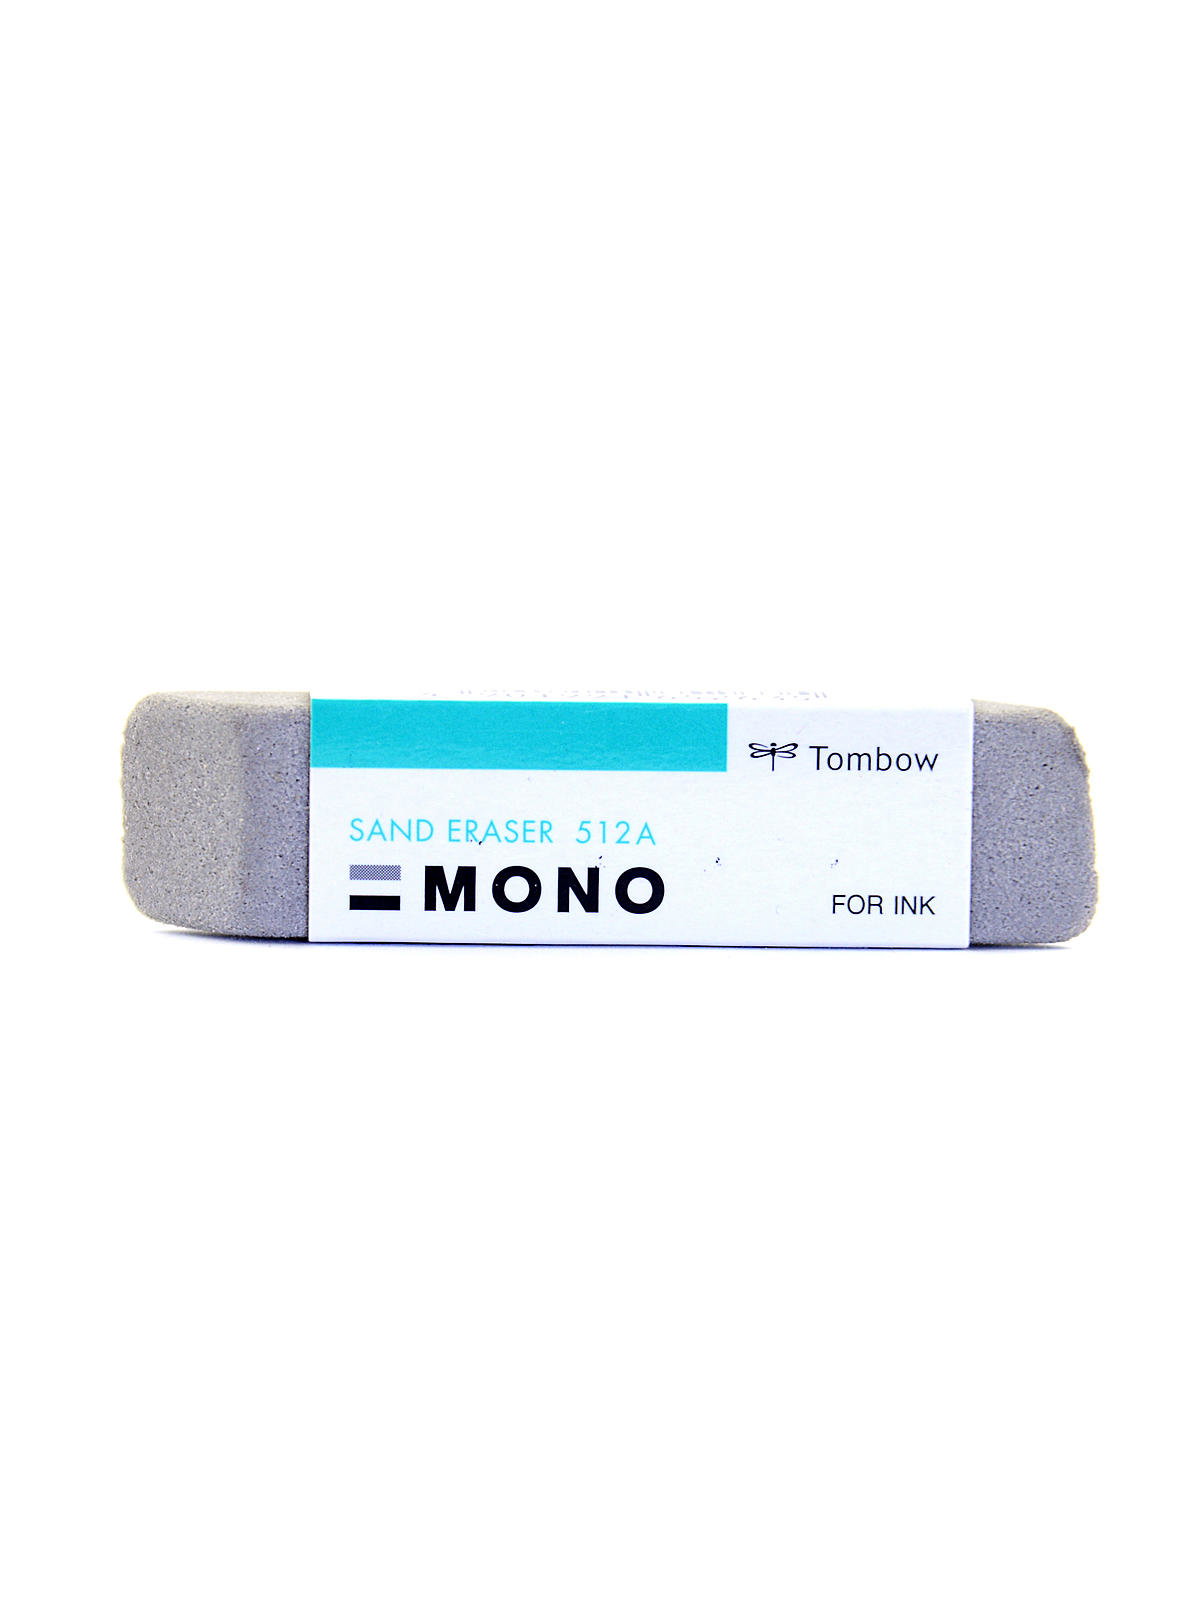 Mono Sand Eraser by Tombow 